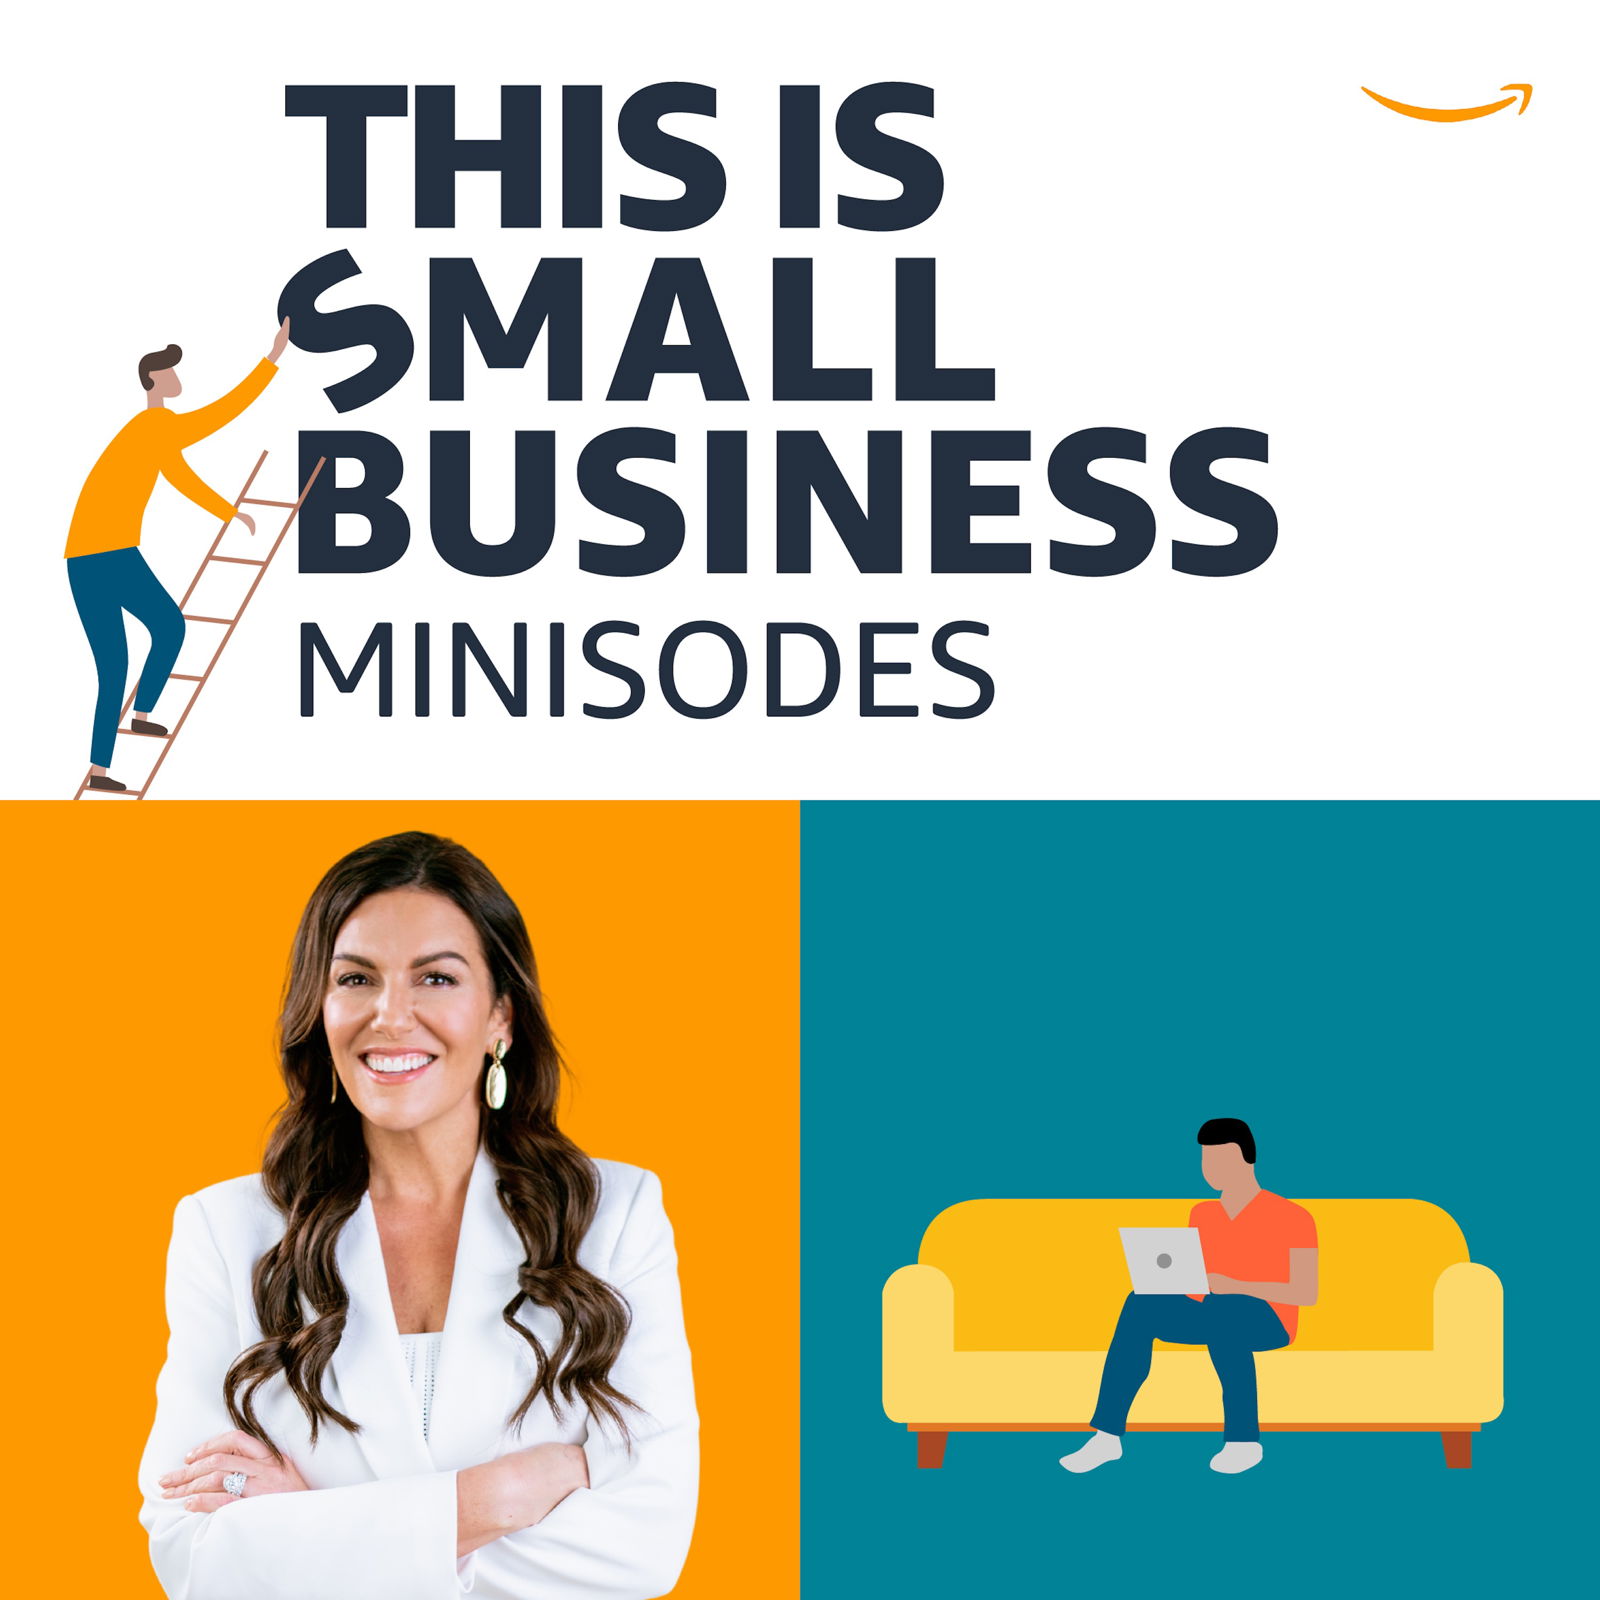 7 Steps to Accelerate Your Small Business Growth - With Amy Porterfield